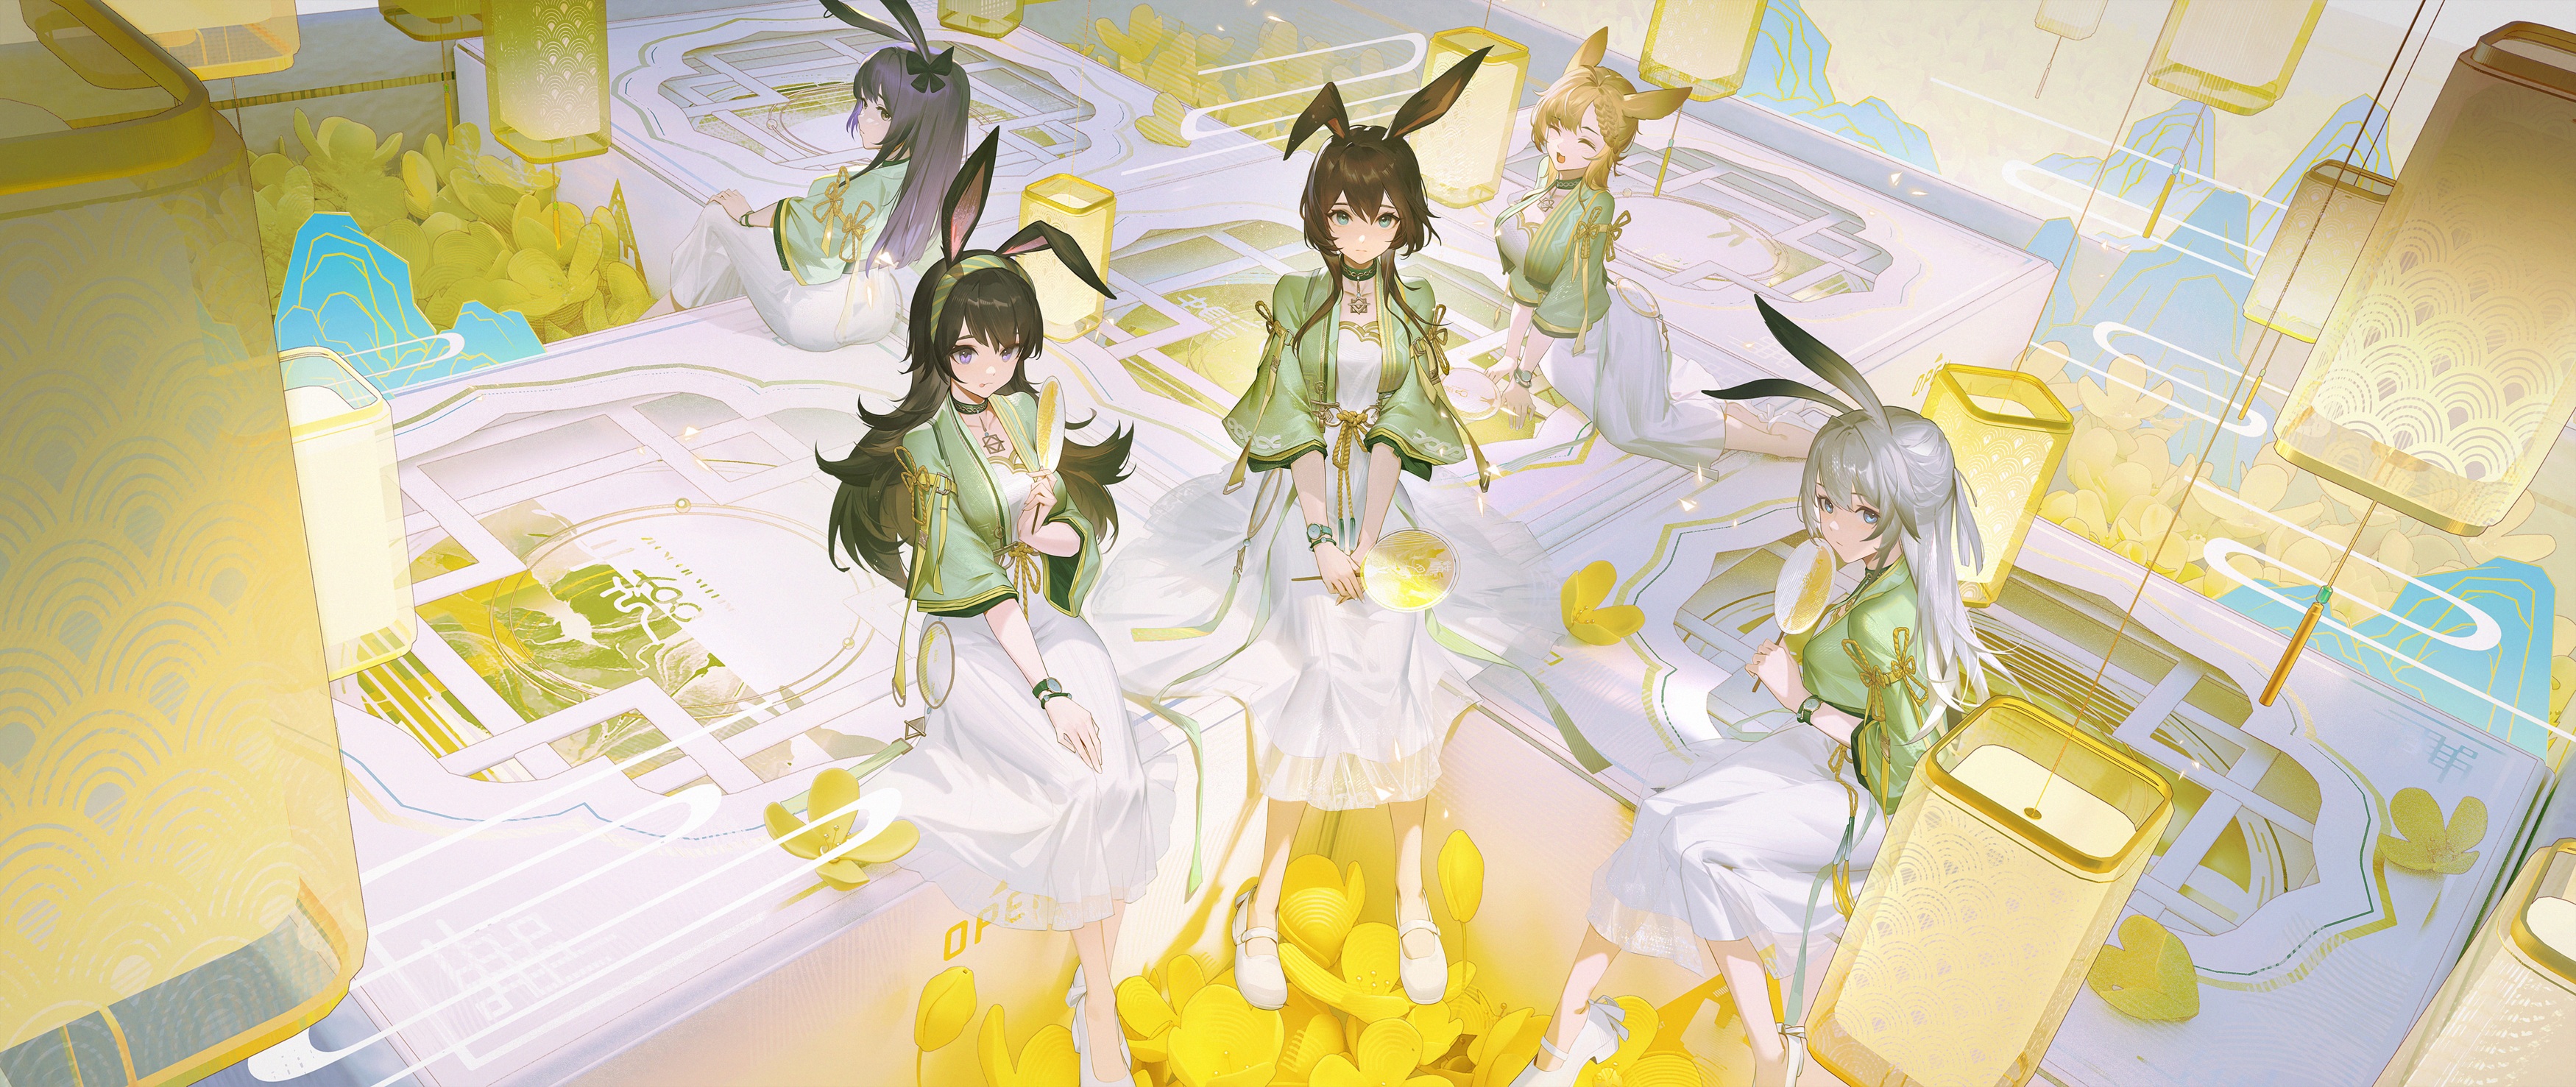 Anime 3500x1477 Arknights bunny ears anime girls dacheng ad group of women sitting animal ears paper lantern looking at viewer dress white dress looking back Amiya (Arknights) lantern April(Arknights) long hair Kroos(Arknights) flowers Rope (Arknights) smiling Savage (Arknights) collar yellow flowers hand fan vest women indoors